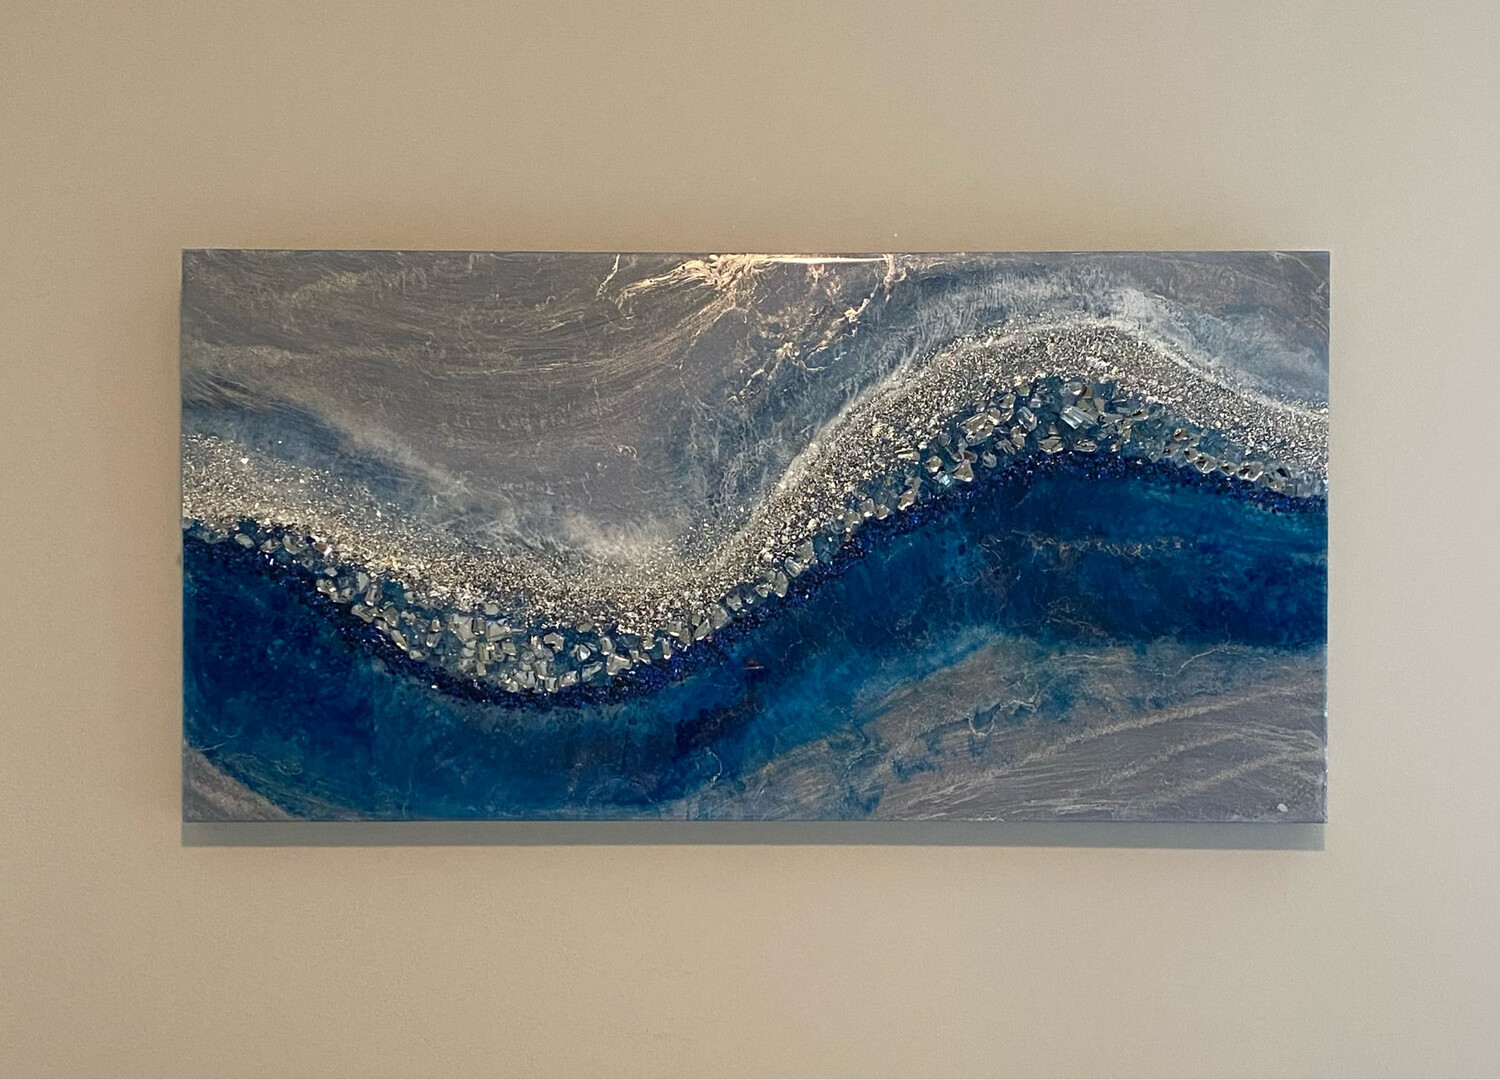 Mystique, 36”x24” Resin & Crushed Glass Available @MukLuk MagPies, Airdrie